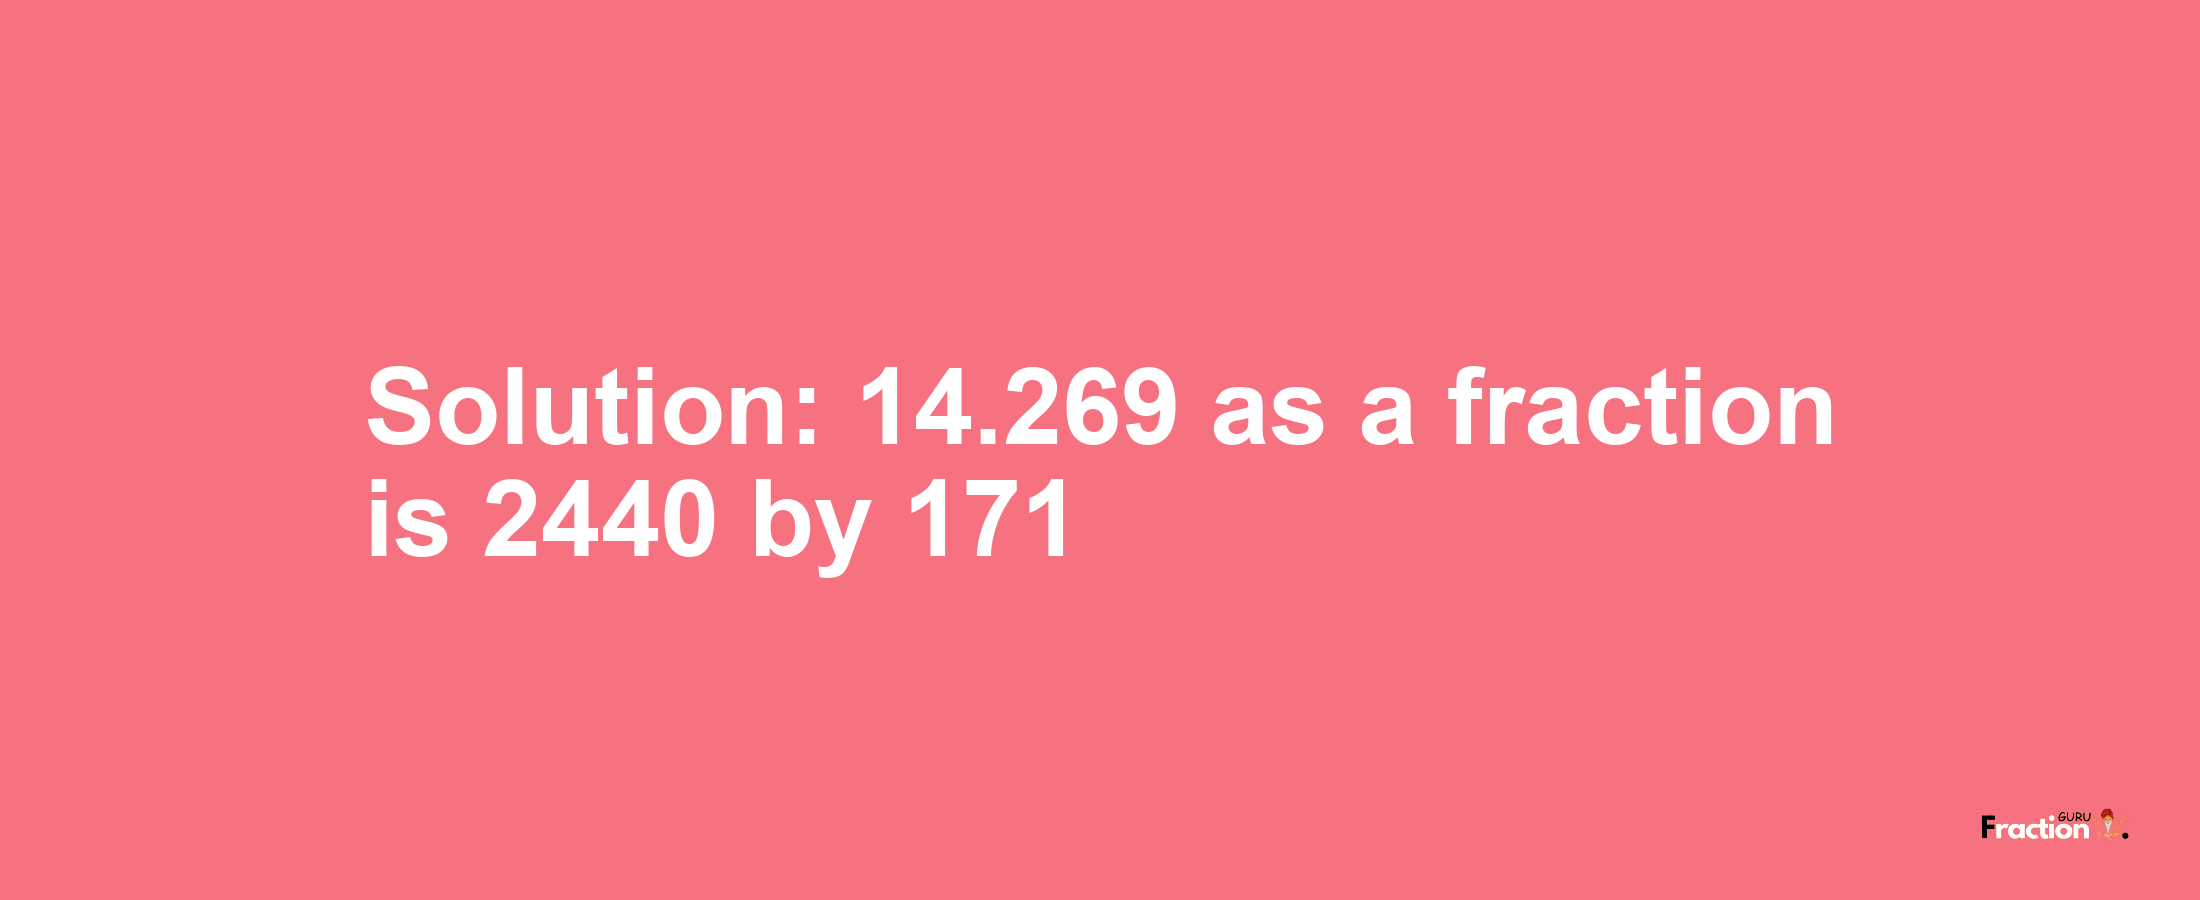 Solution:14.269 as a fraction is 2440/171